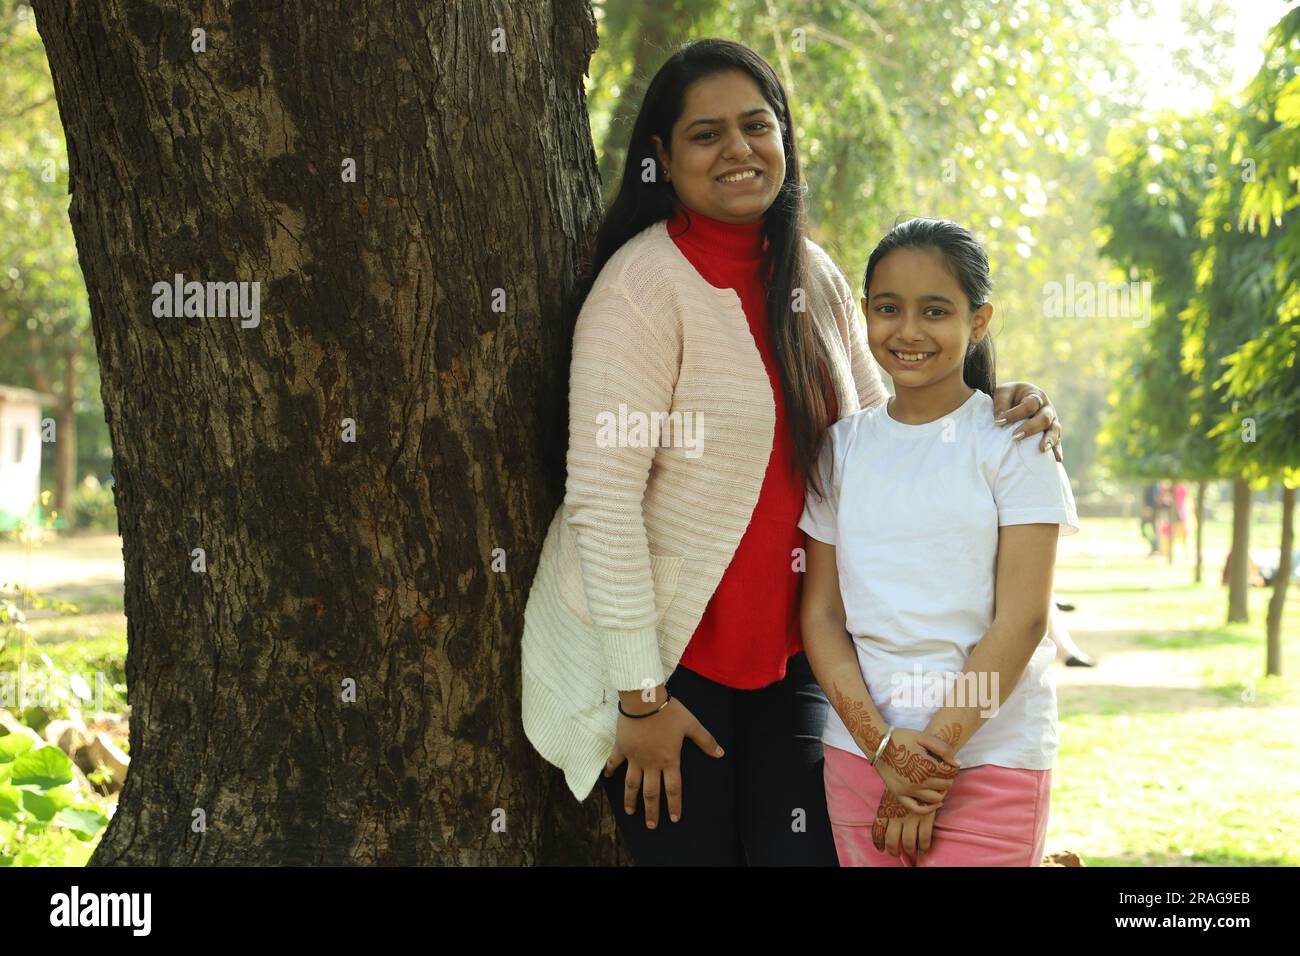 Indian mother and daughter having a cheerful time together in the park in day time. Daughter is being loved and feeling secure with her mother. Stock Photo